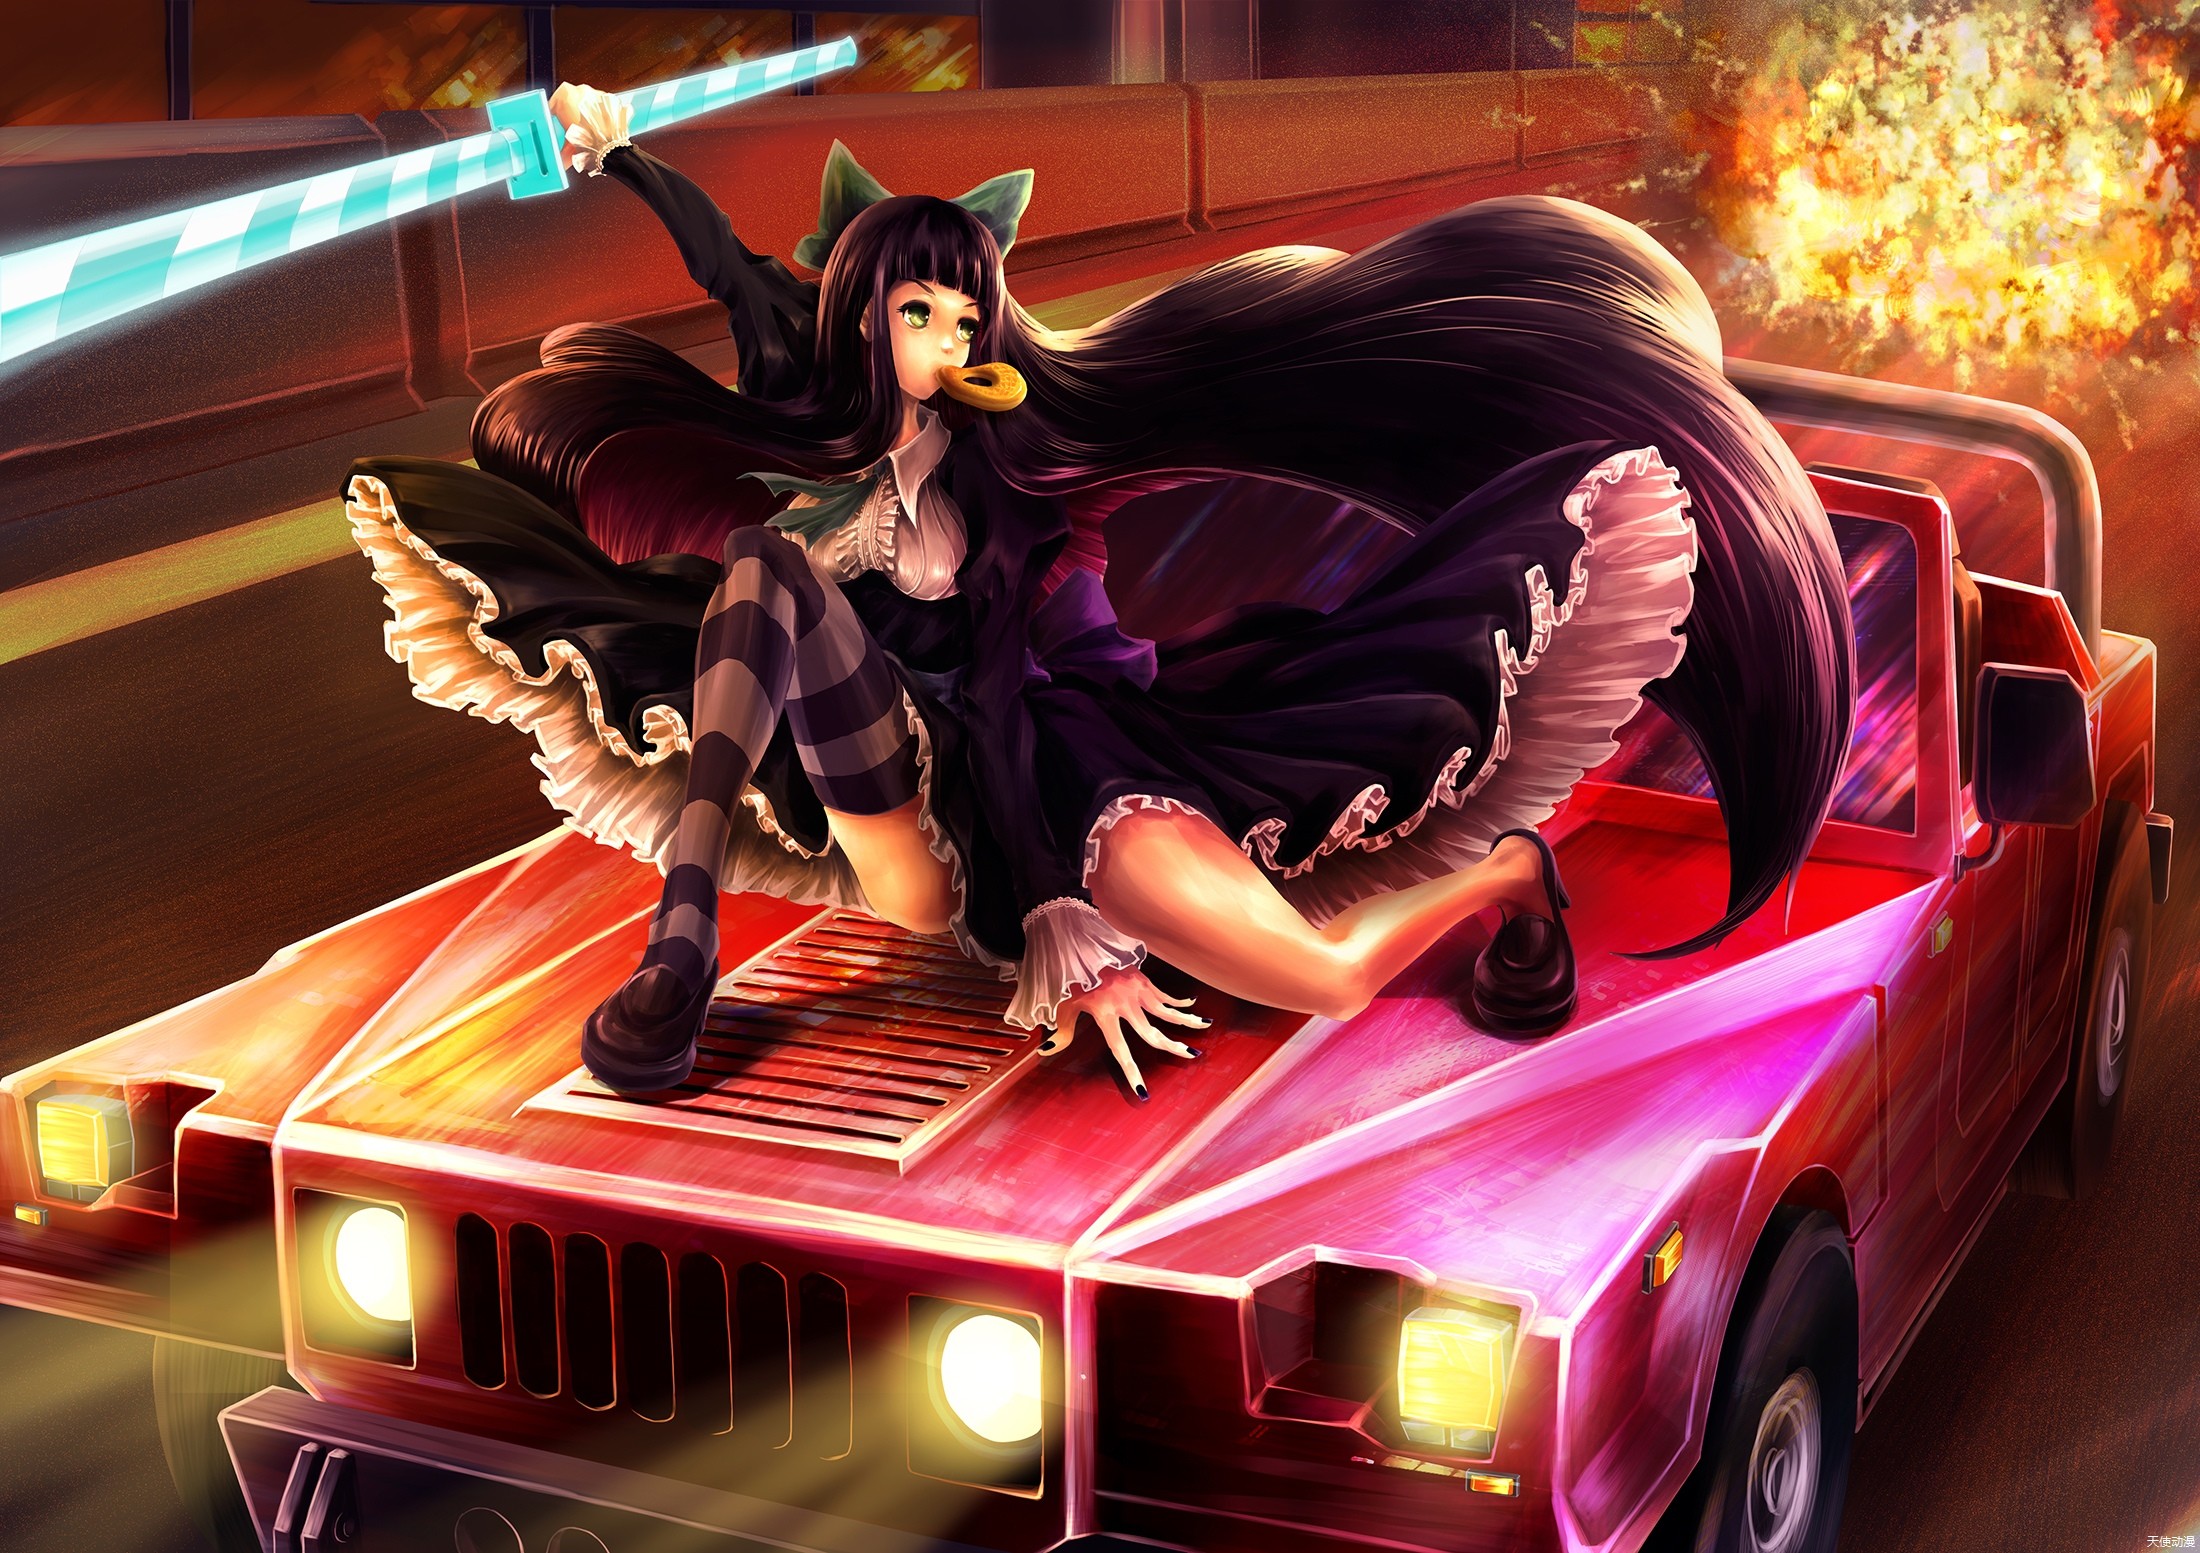 Anime Panty And Stocking With Garterbelt Anarchy Stocking 2200x1553